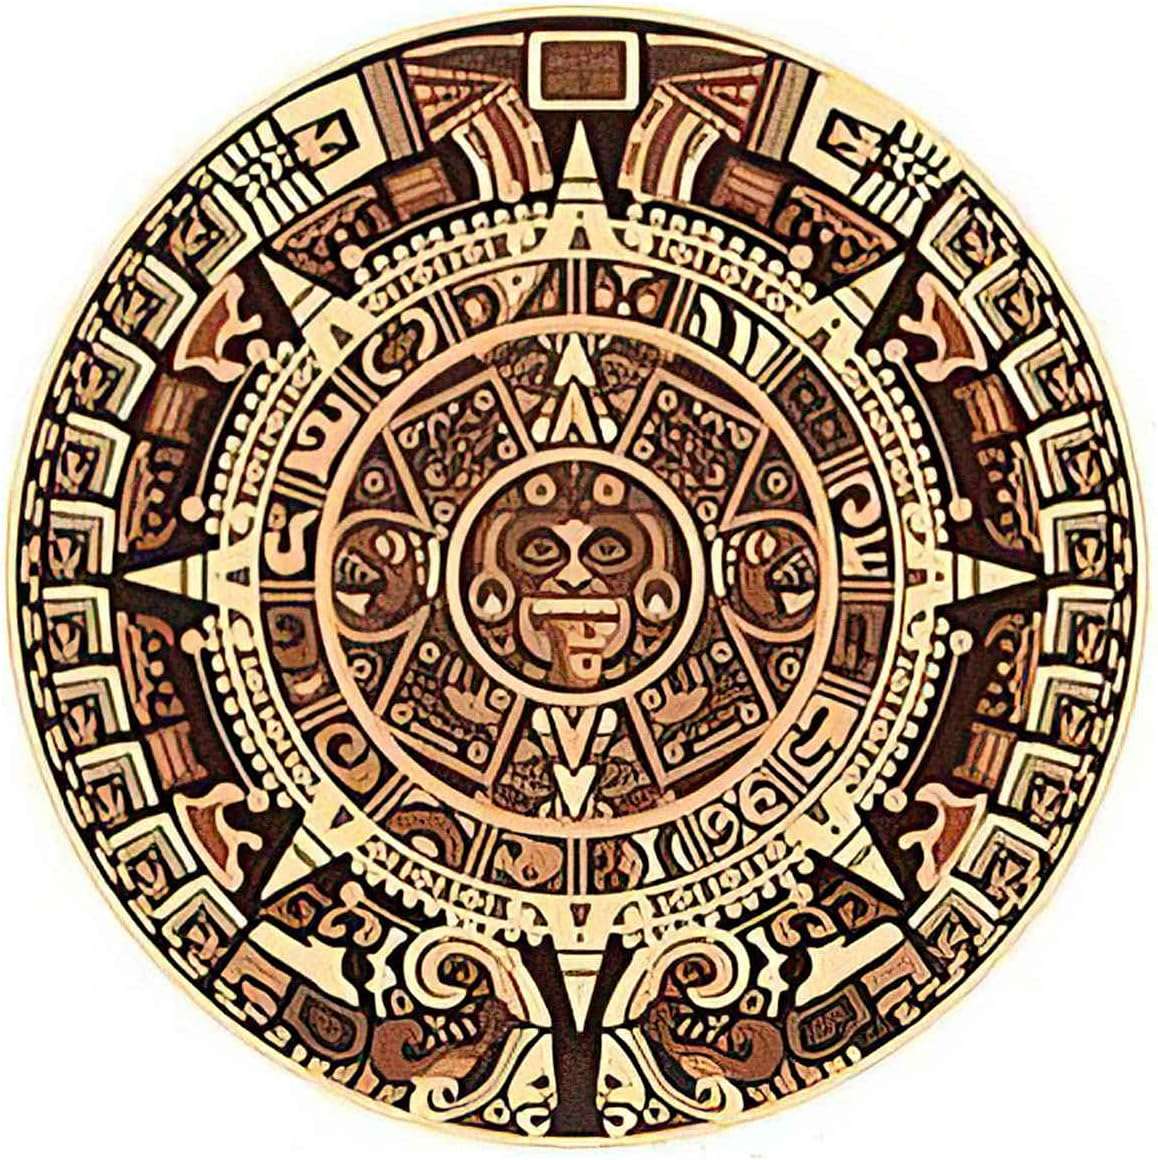 The calendar of the Aztecs puzzle online from photo